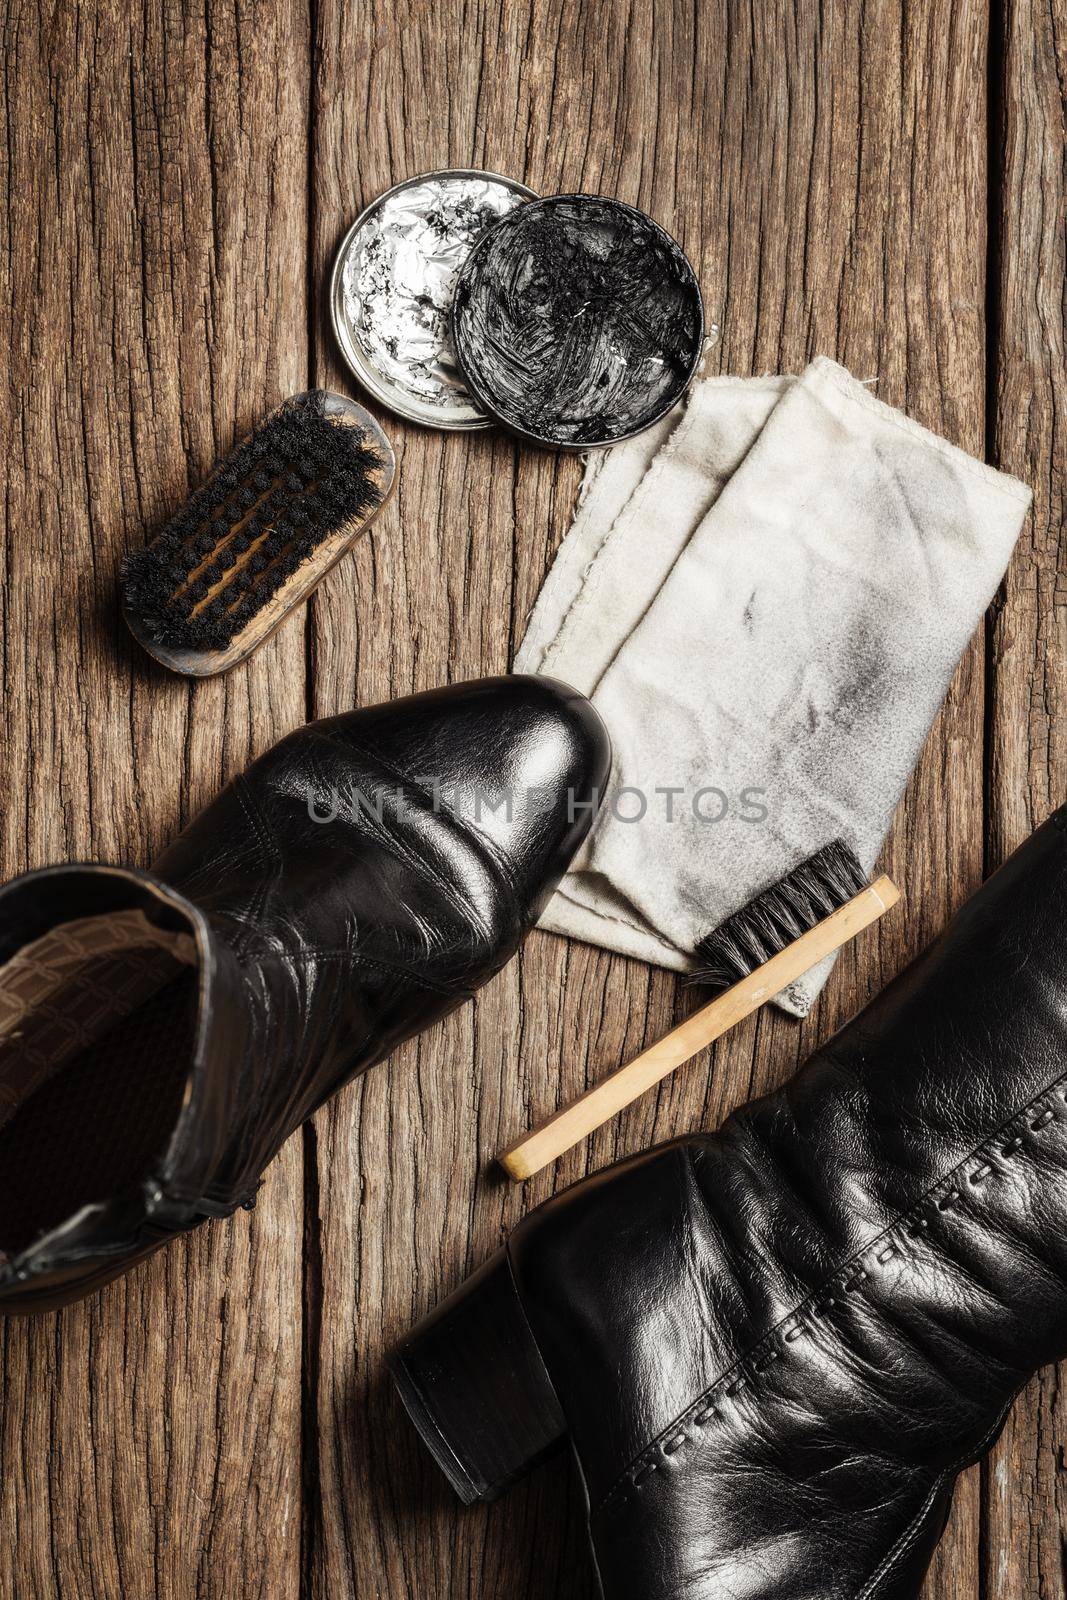 black leather boots with shoe maintenance set